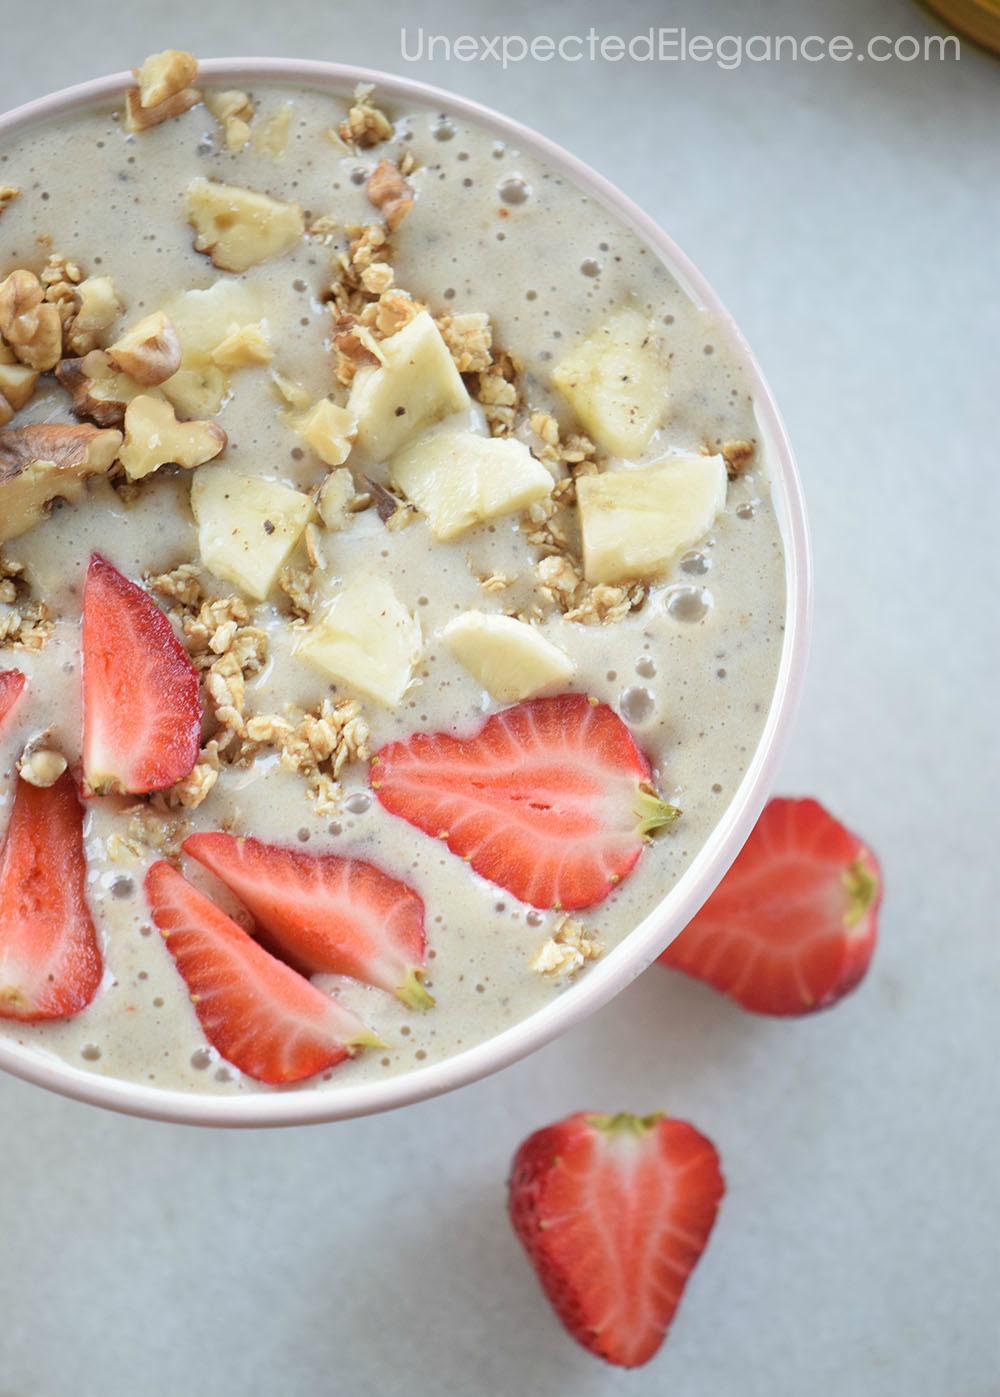 Do you love smoothies? Have you tried a smoothie bowl?? This Strawberry Banana Smoothie Bowl is delicious and will leave you feeling full.